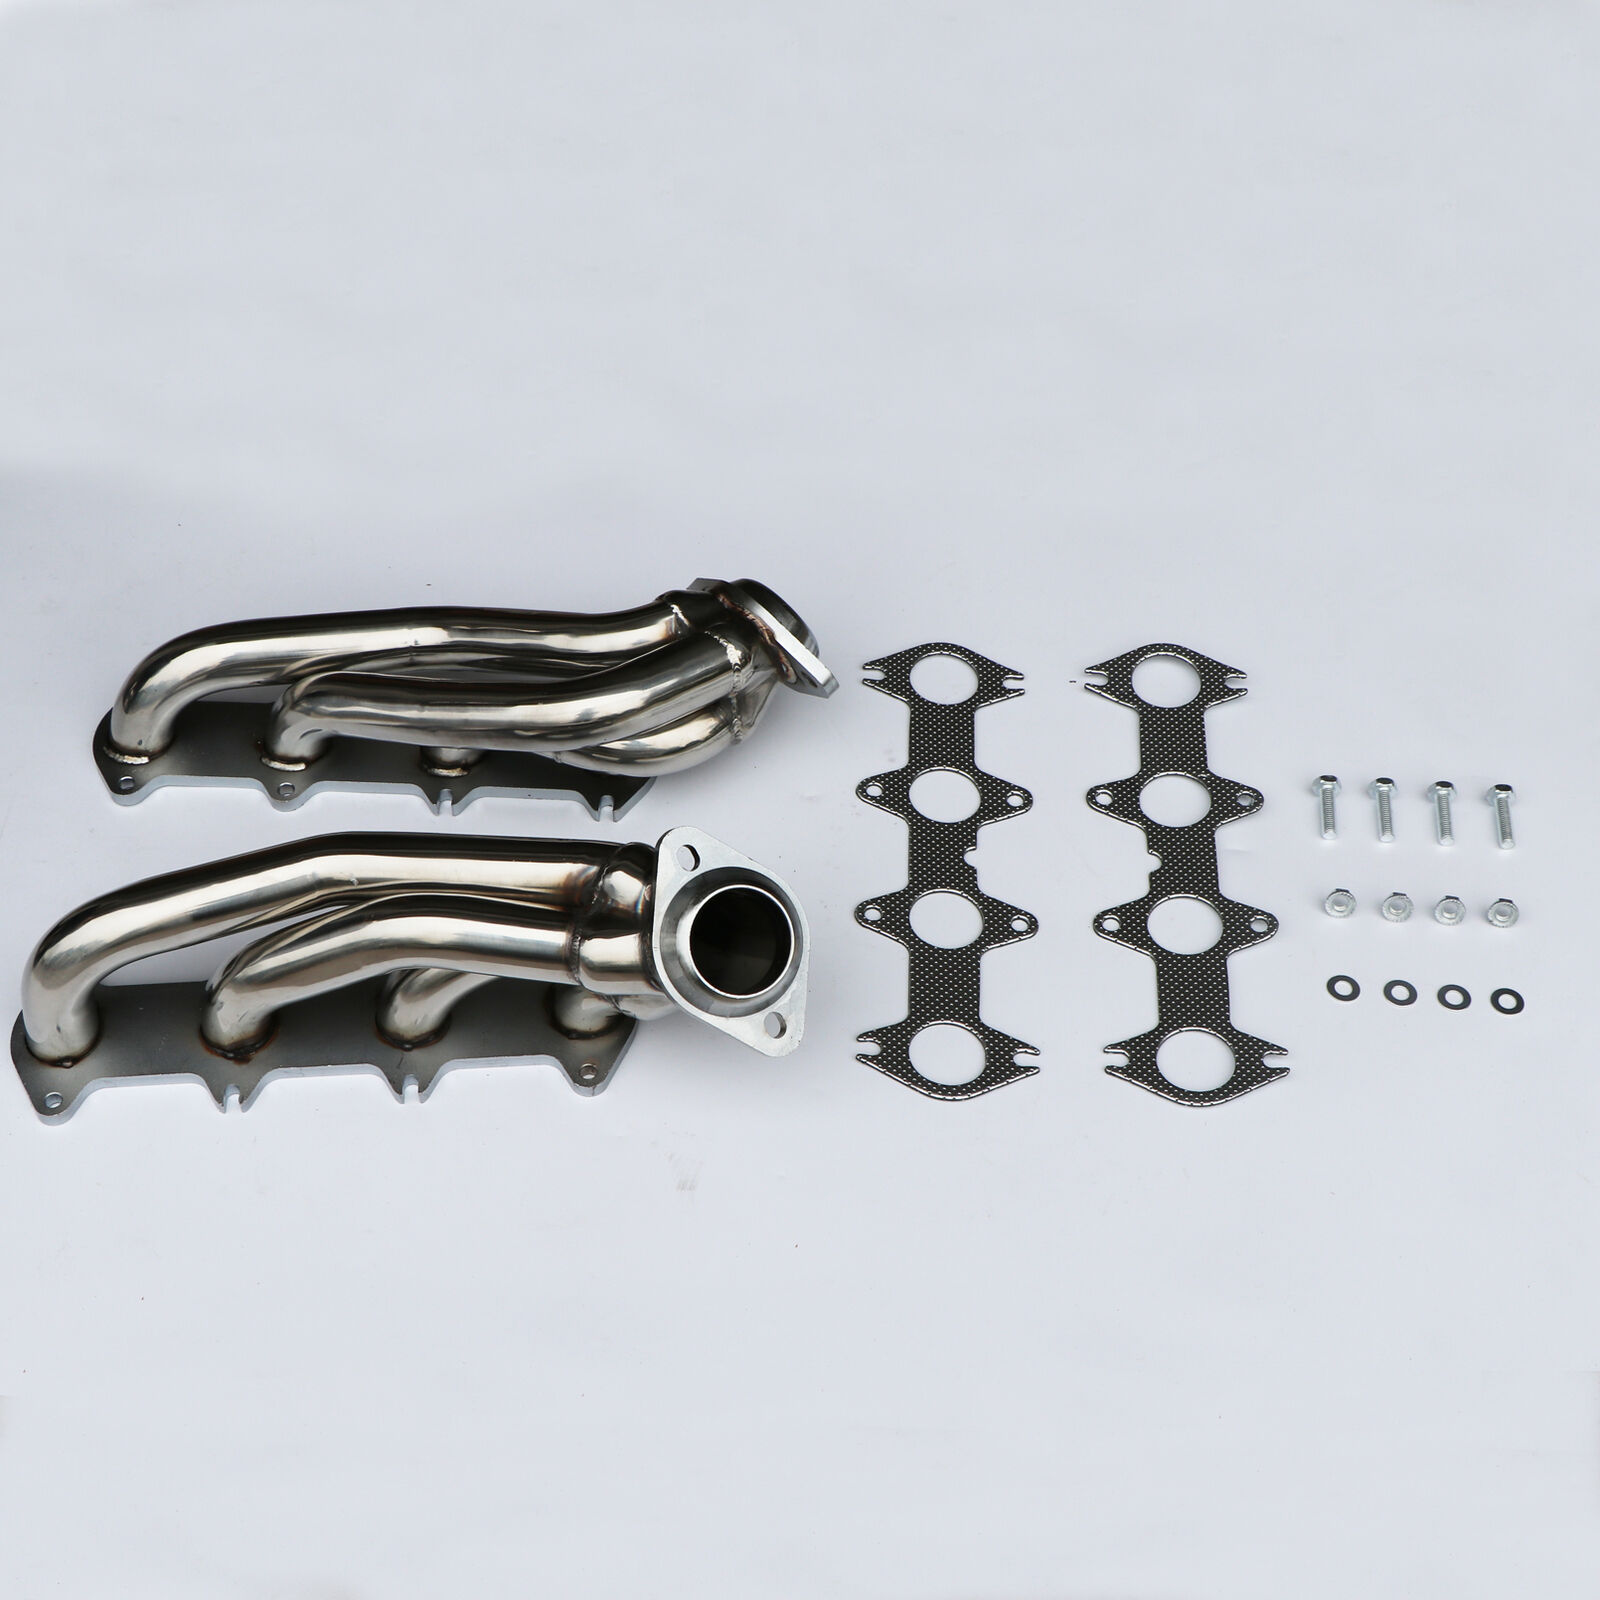 Stainless Exhaust Manifold Shorty Headers manifold For Ford F150 5.4L V8 2004-10